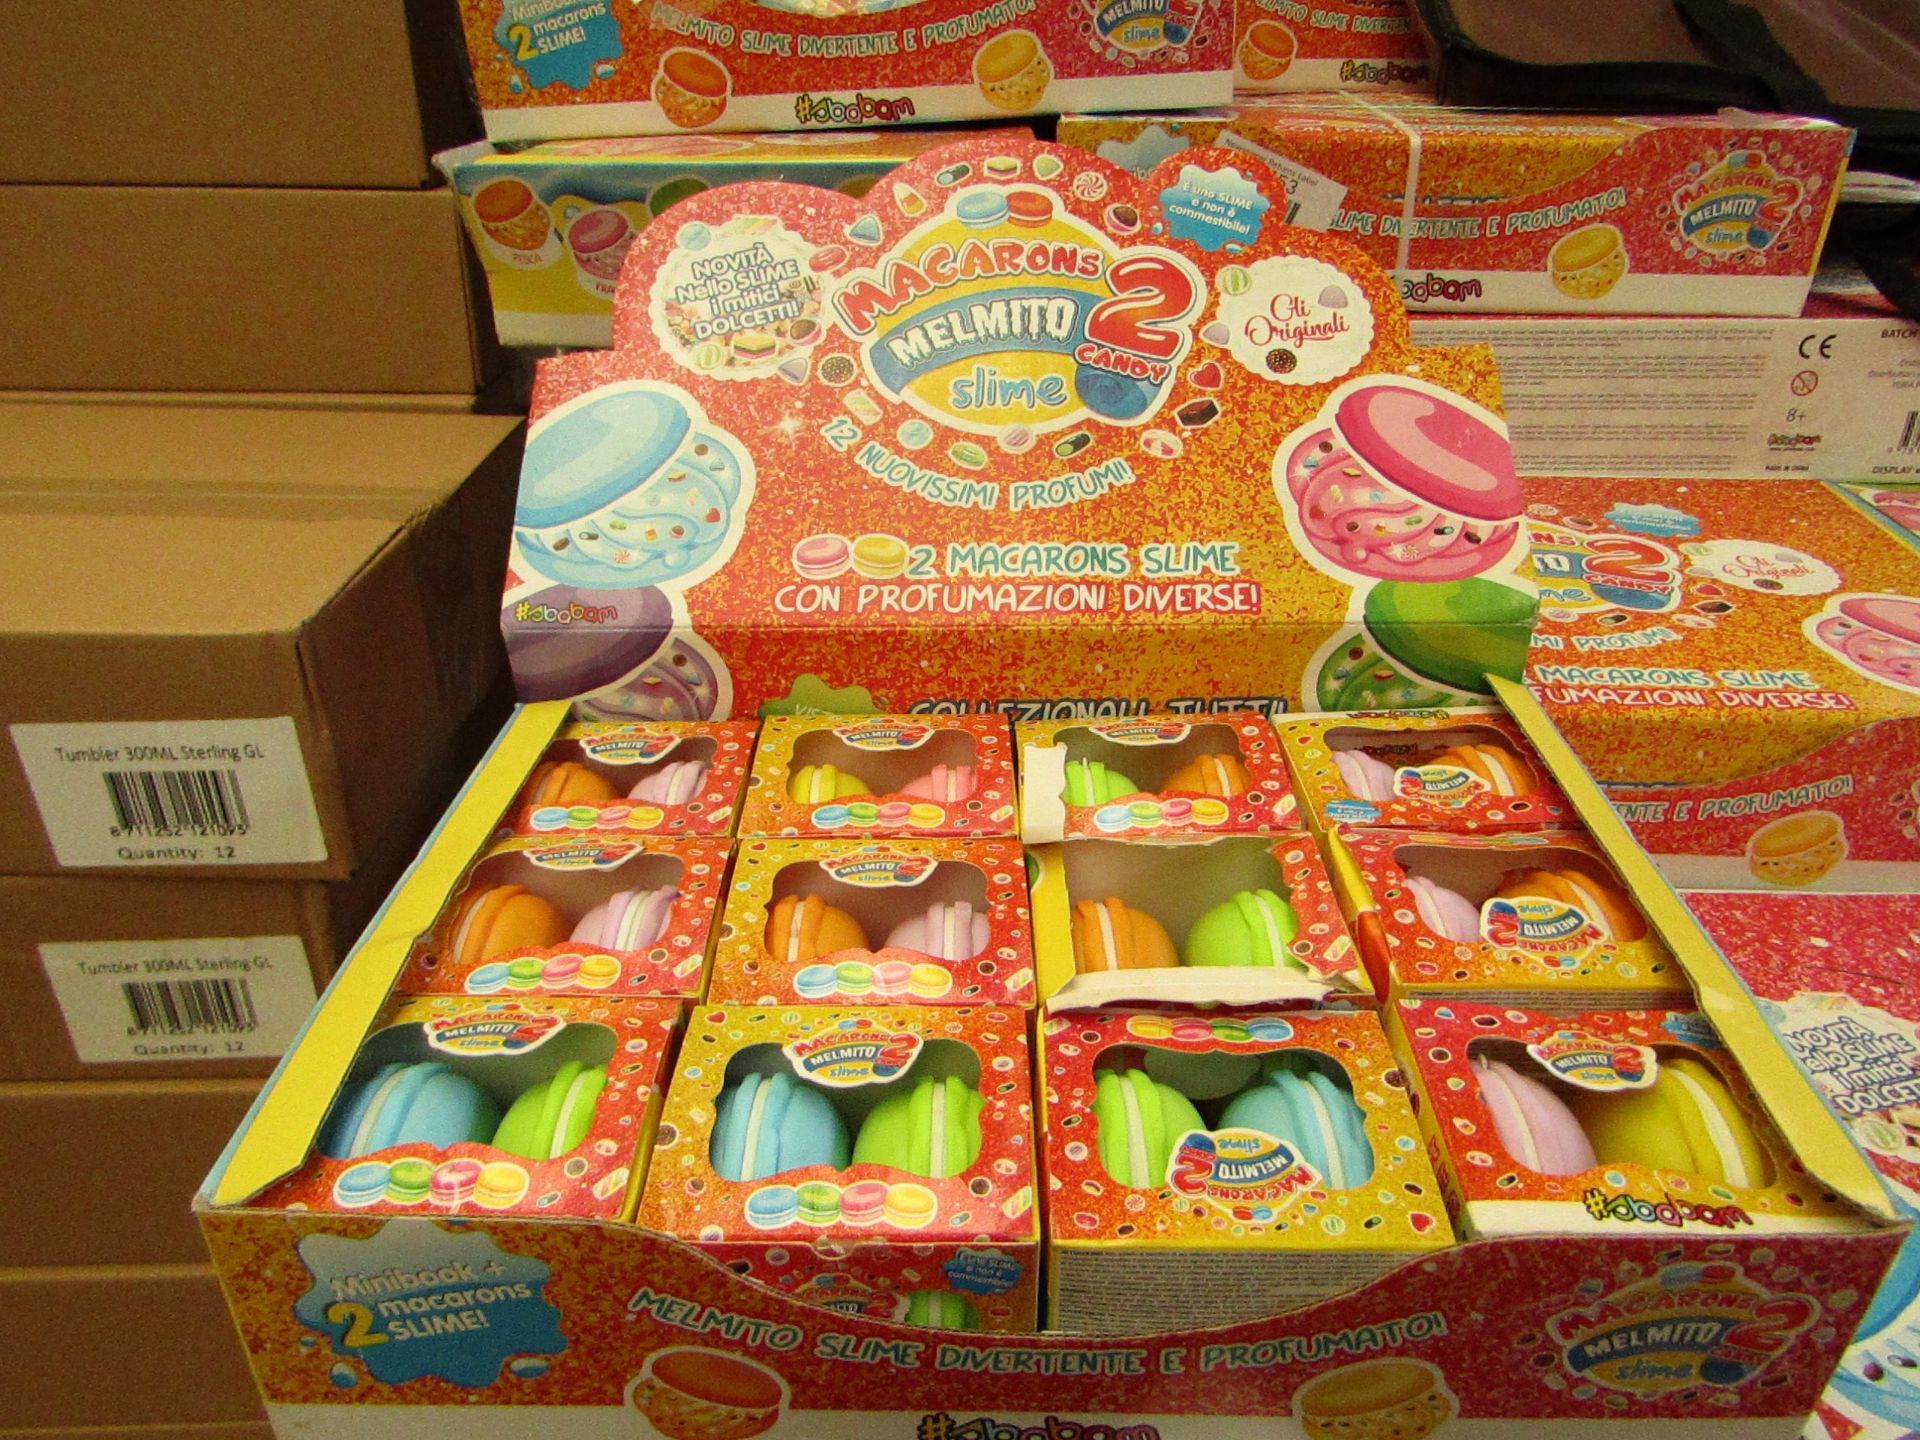 1 x Box of 12 Packs of 2 Macarons Slime - New & Boxed.